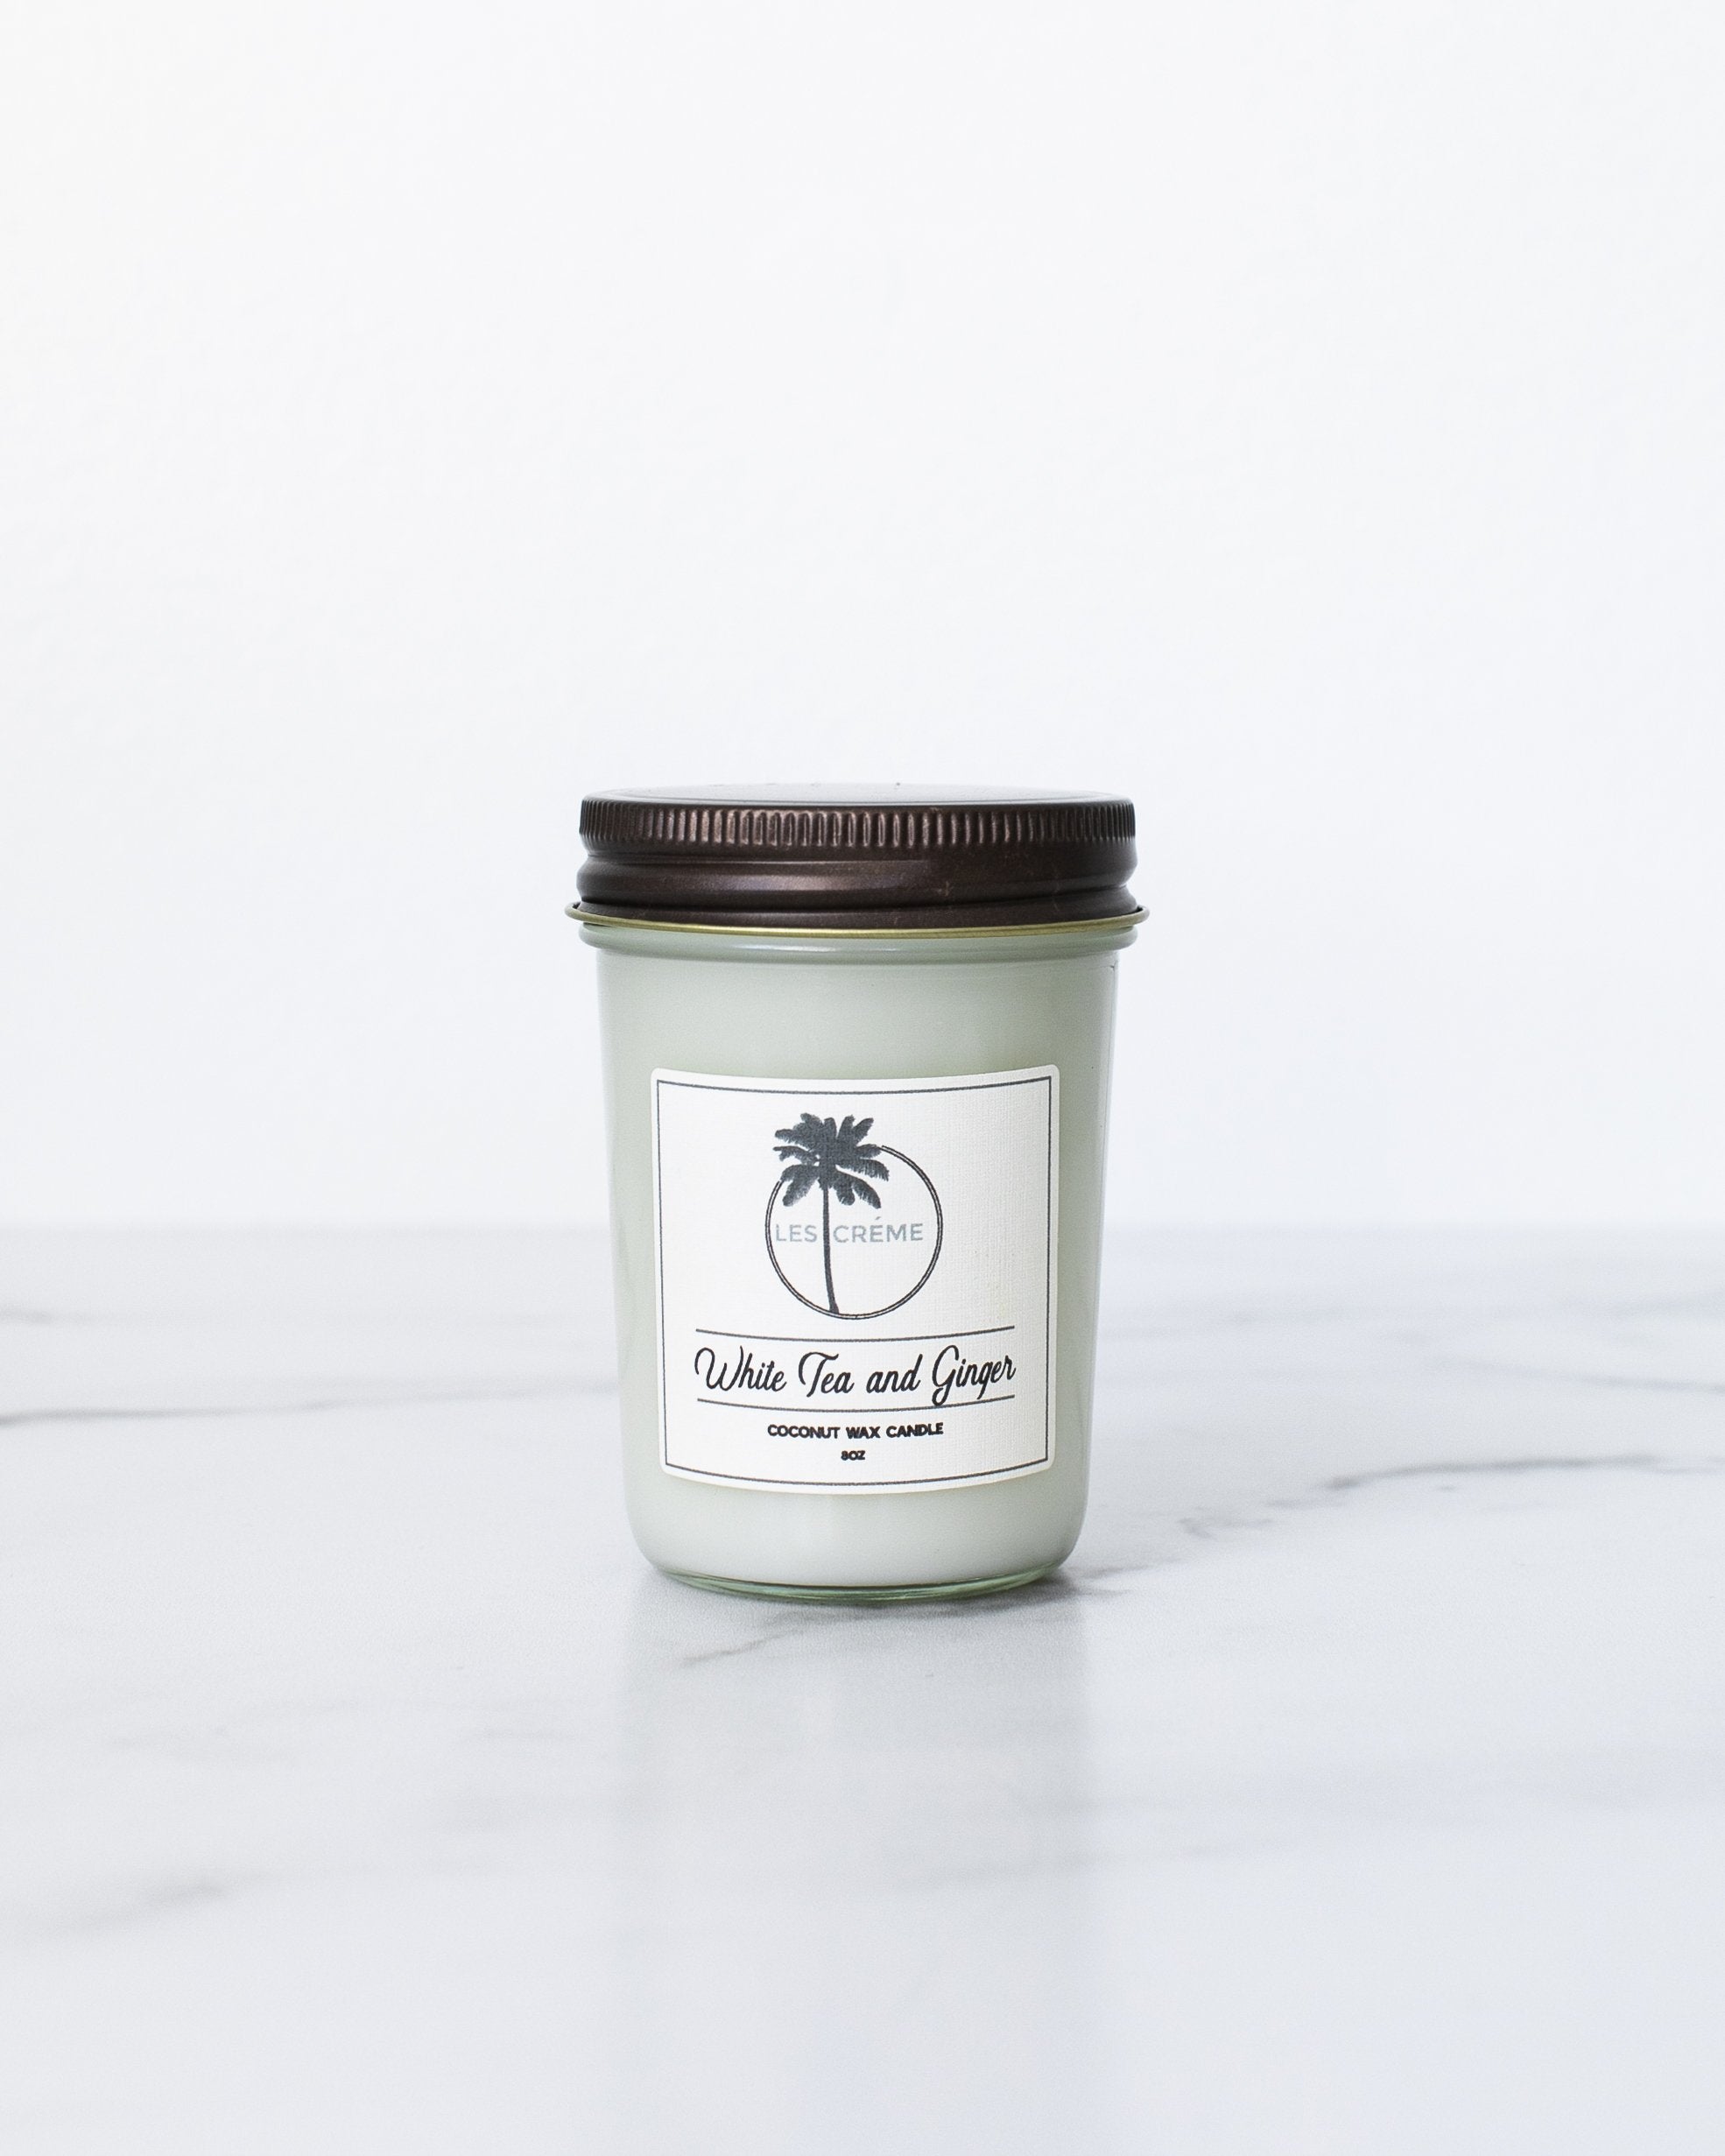 White Tea + Ginger Scent Coconut Wax Candle